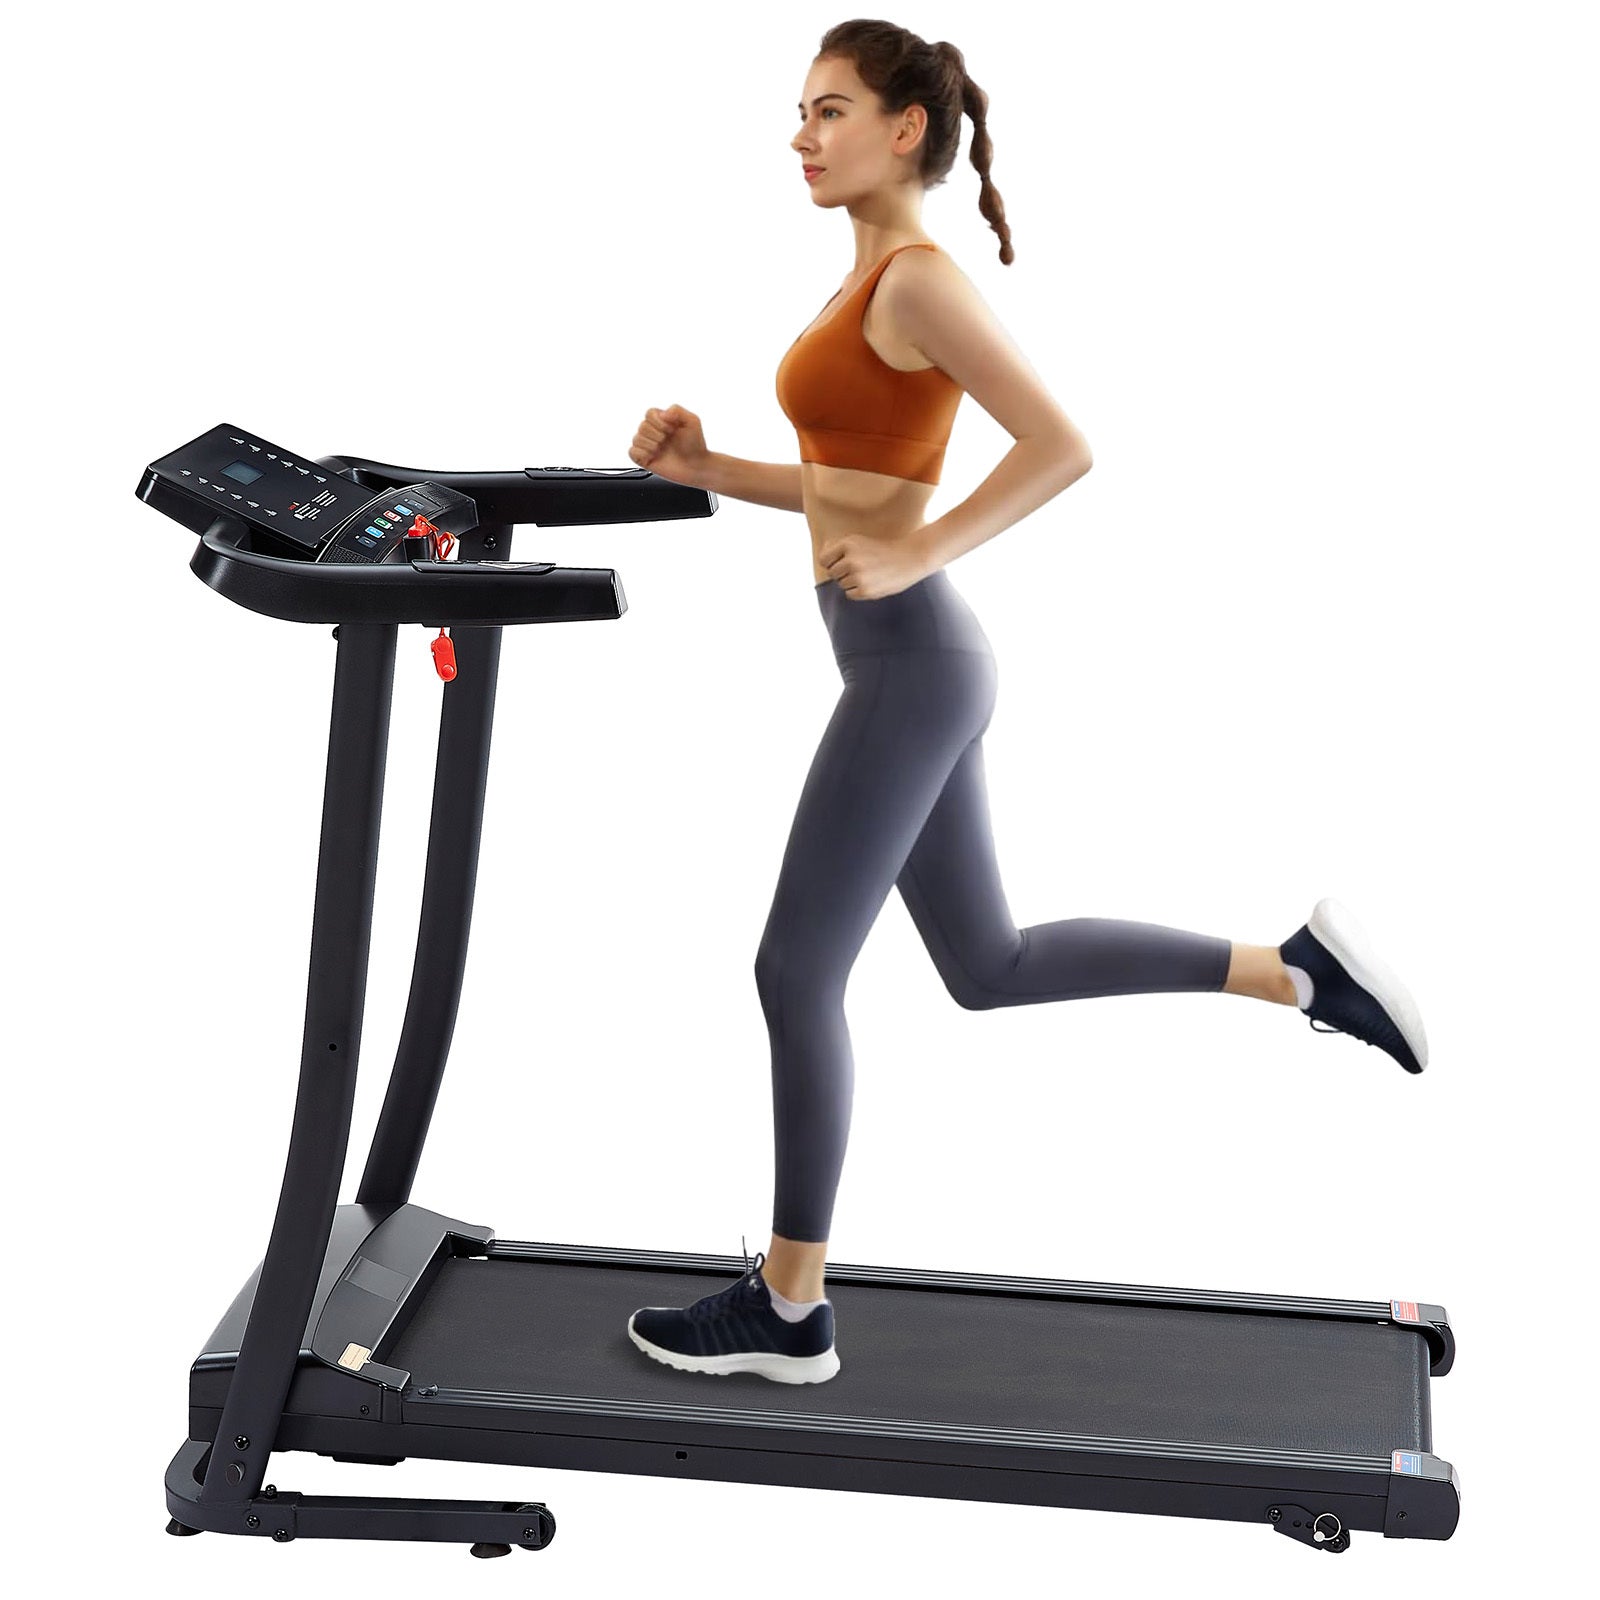 Treadmill-2.5-HP-folding-treadmill,-easy-to-move,-with-3-speed-incline-adjustment-and-12-preset-programs,-3-countdown-modes-Exercise-&-Fitness